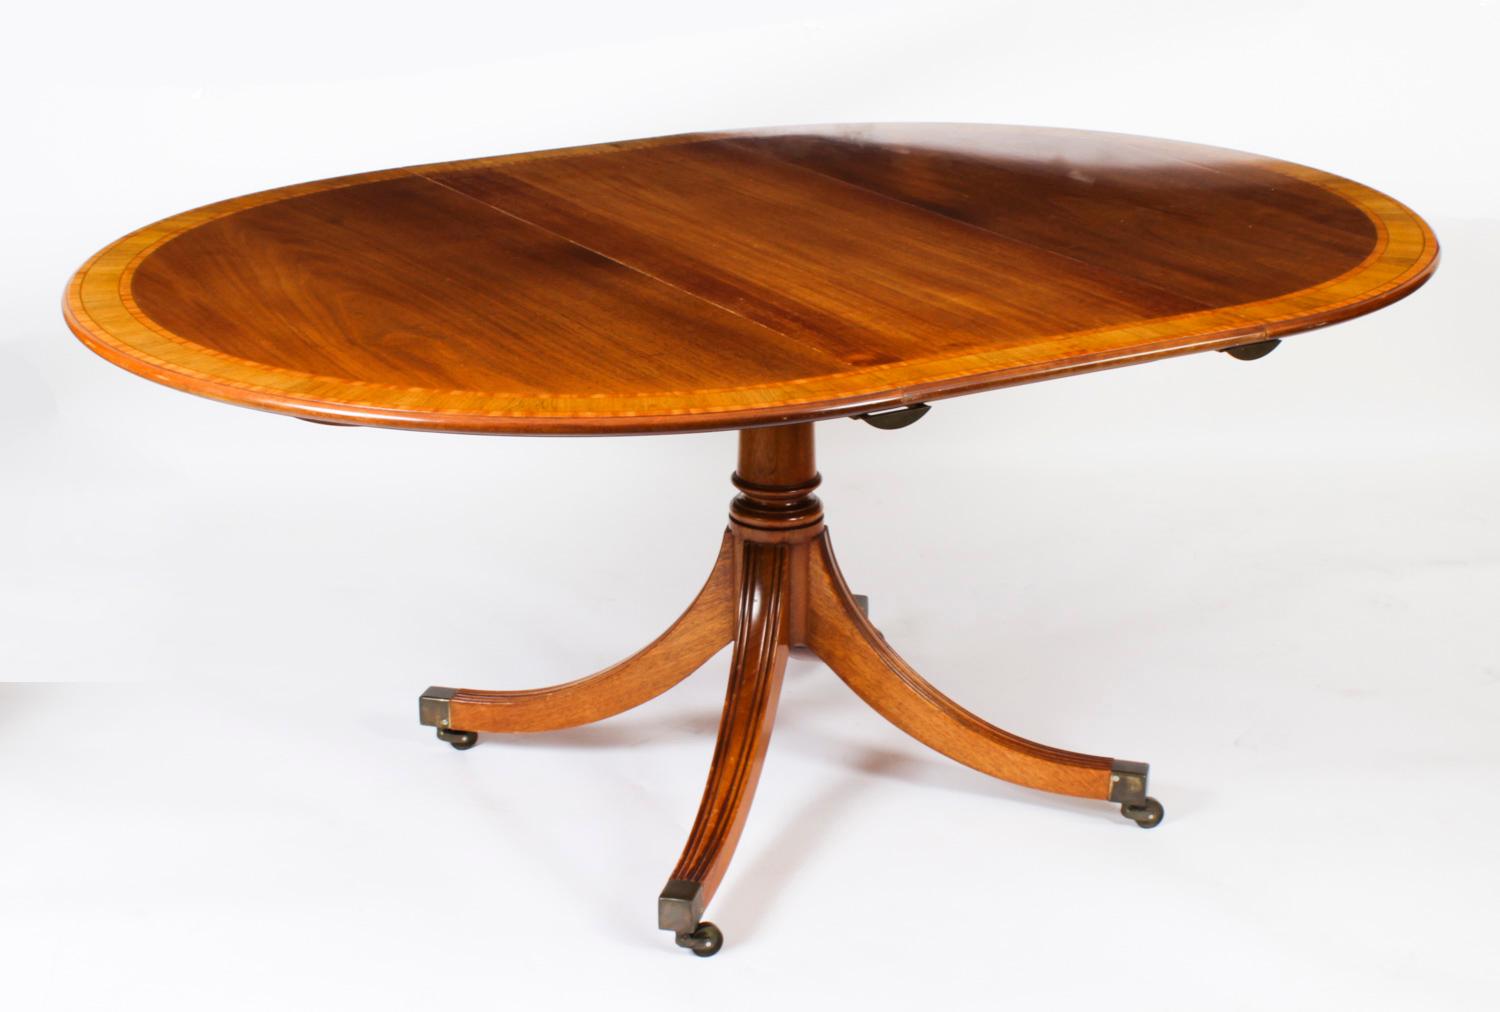 This is a beautiful Regency Revival blond mahogany and Satinwood banded oval dining table with a set ofsix Regency Revival dining chairs, all dating from Circa 1980 made by the Master Cabinet maker William Tillman and bearing his label.

The